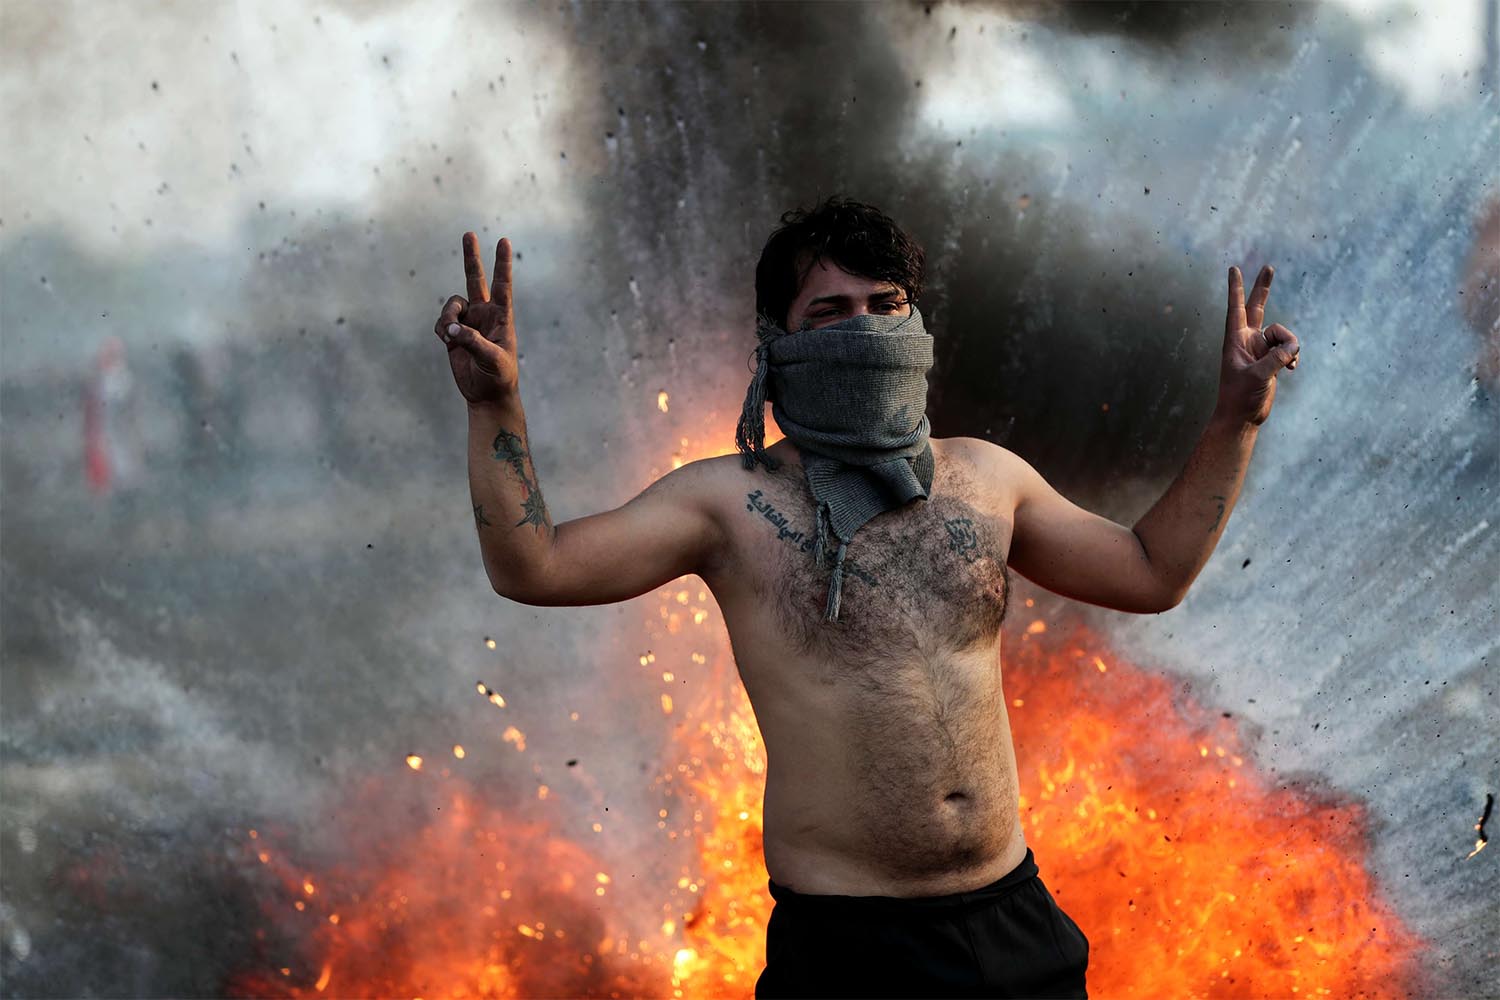 An Iraqi demonstrator gestures during ongoing anti-government protests in Baghdad